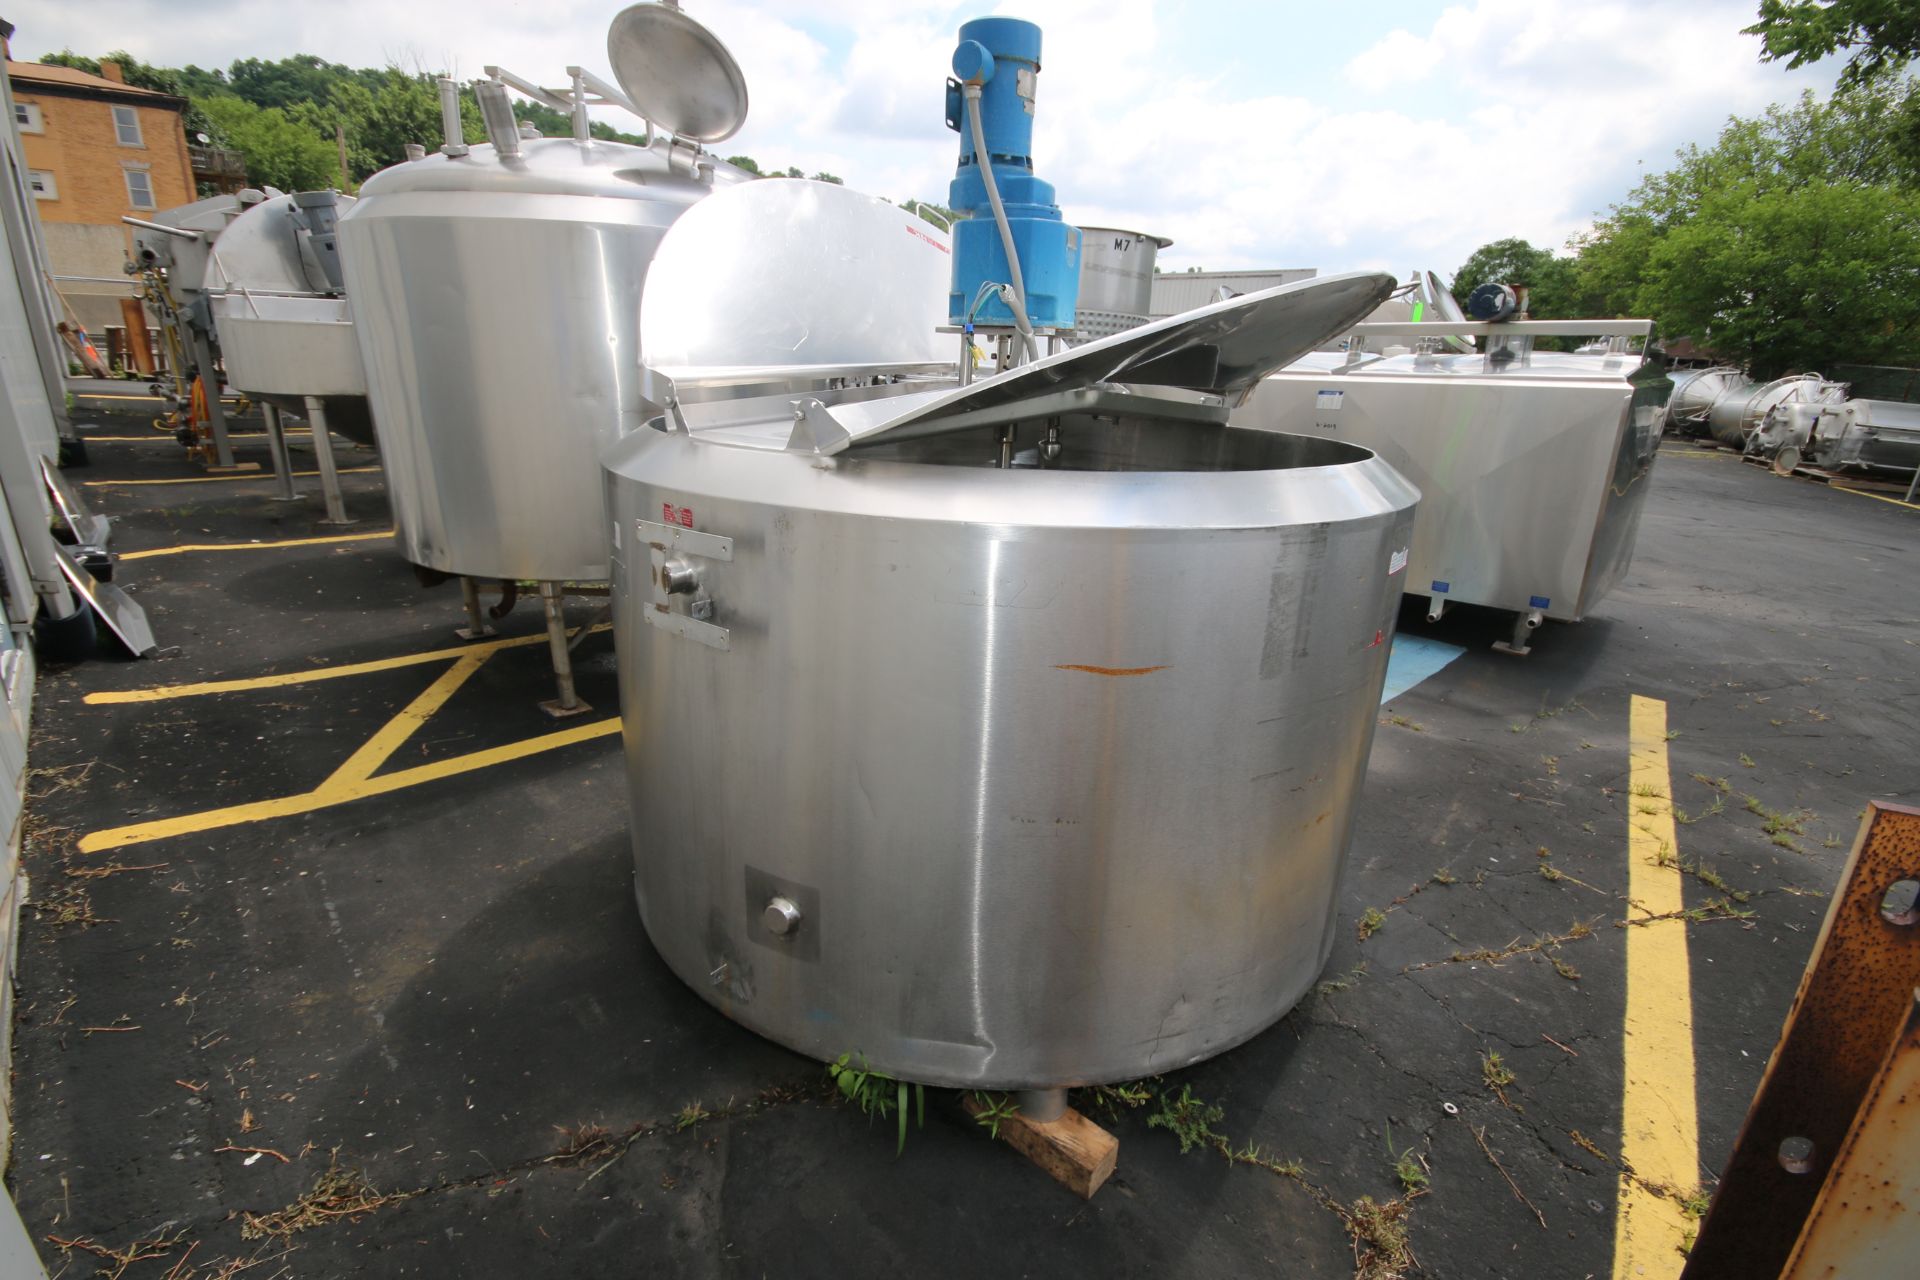 Crepaco 550 Gallon S/S Jacketed Tank, S/N C8652, Heat Exchange Jacket 50 PSIG, with CIP Spray - Image 4 of 6